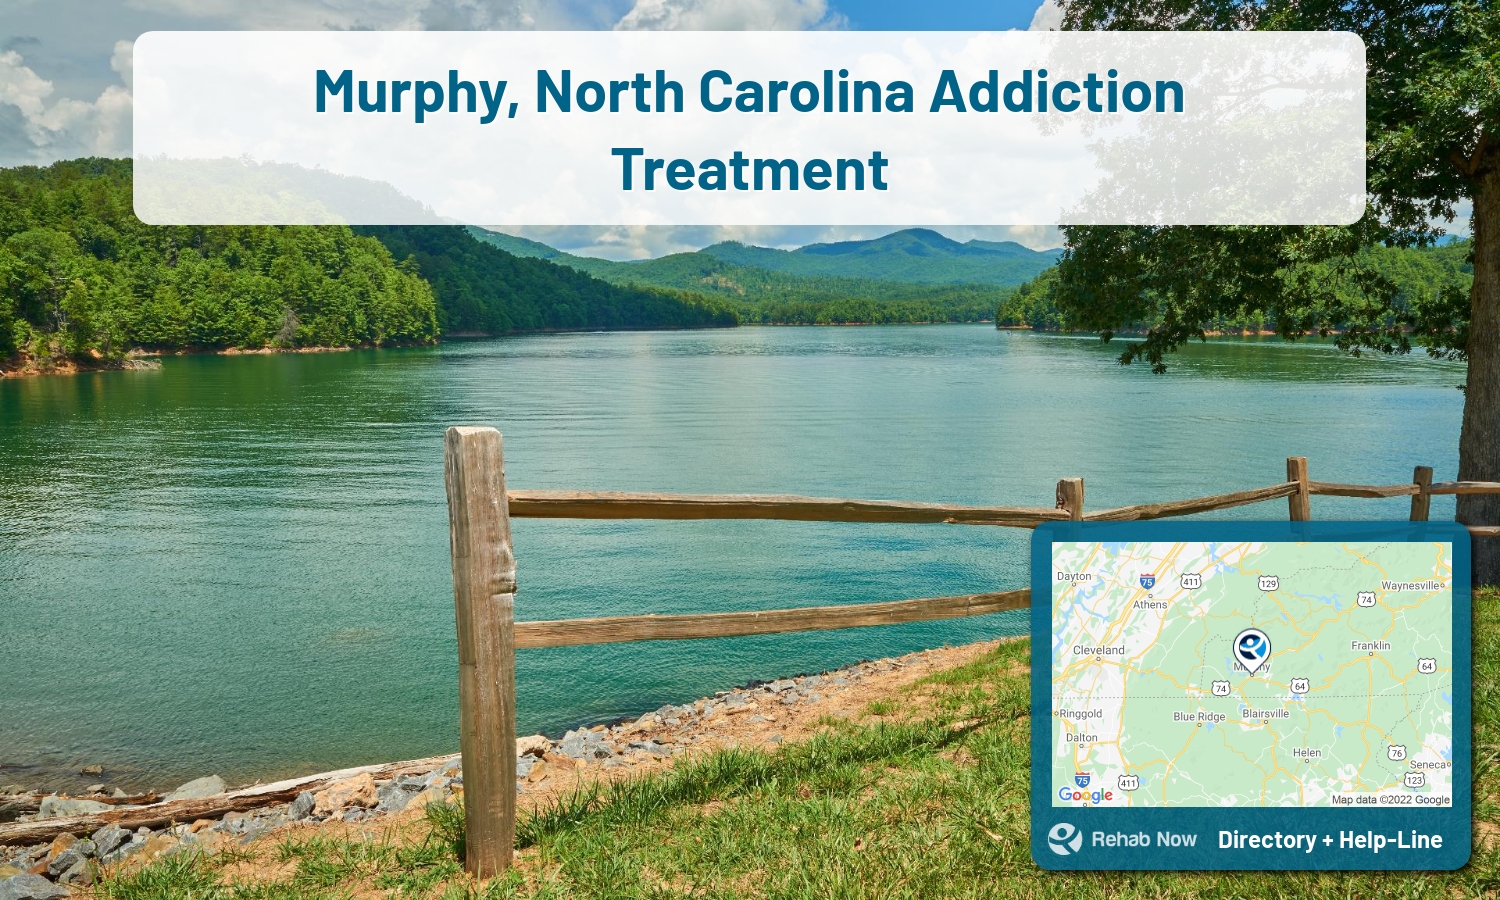 View options, availability, treatment methods, and more, for drug rehab and alcohol treatment in Murphy, North Carolina